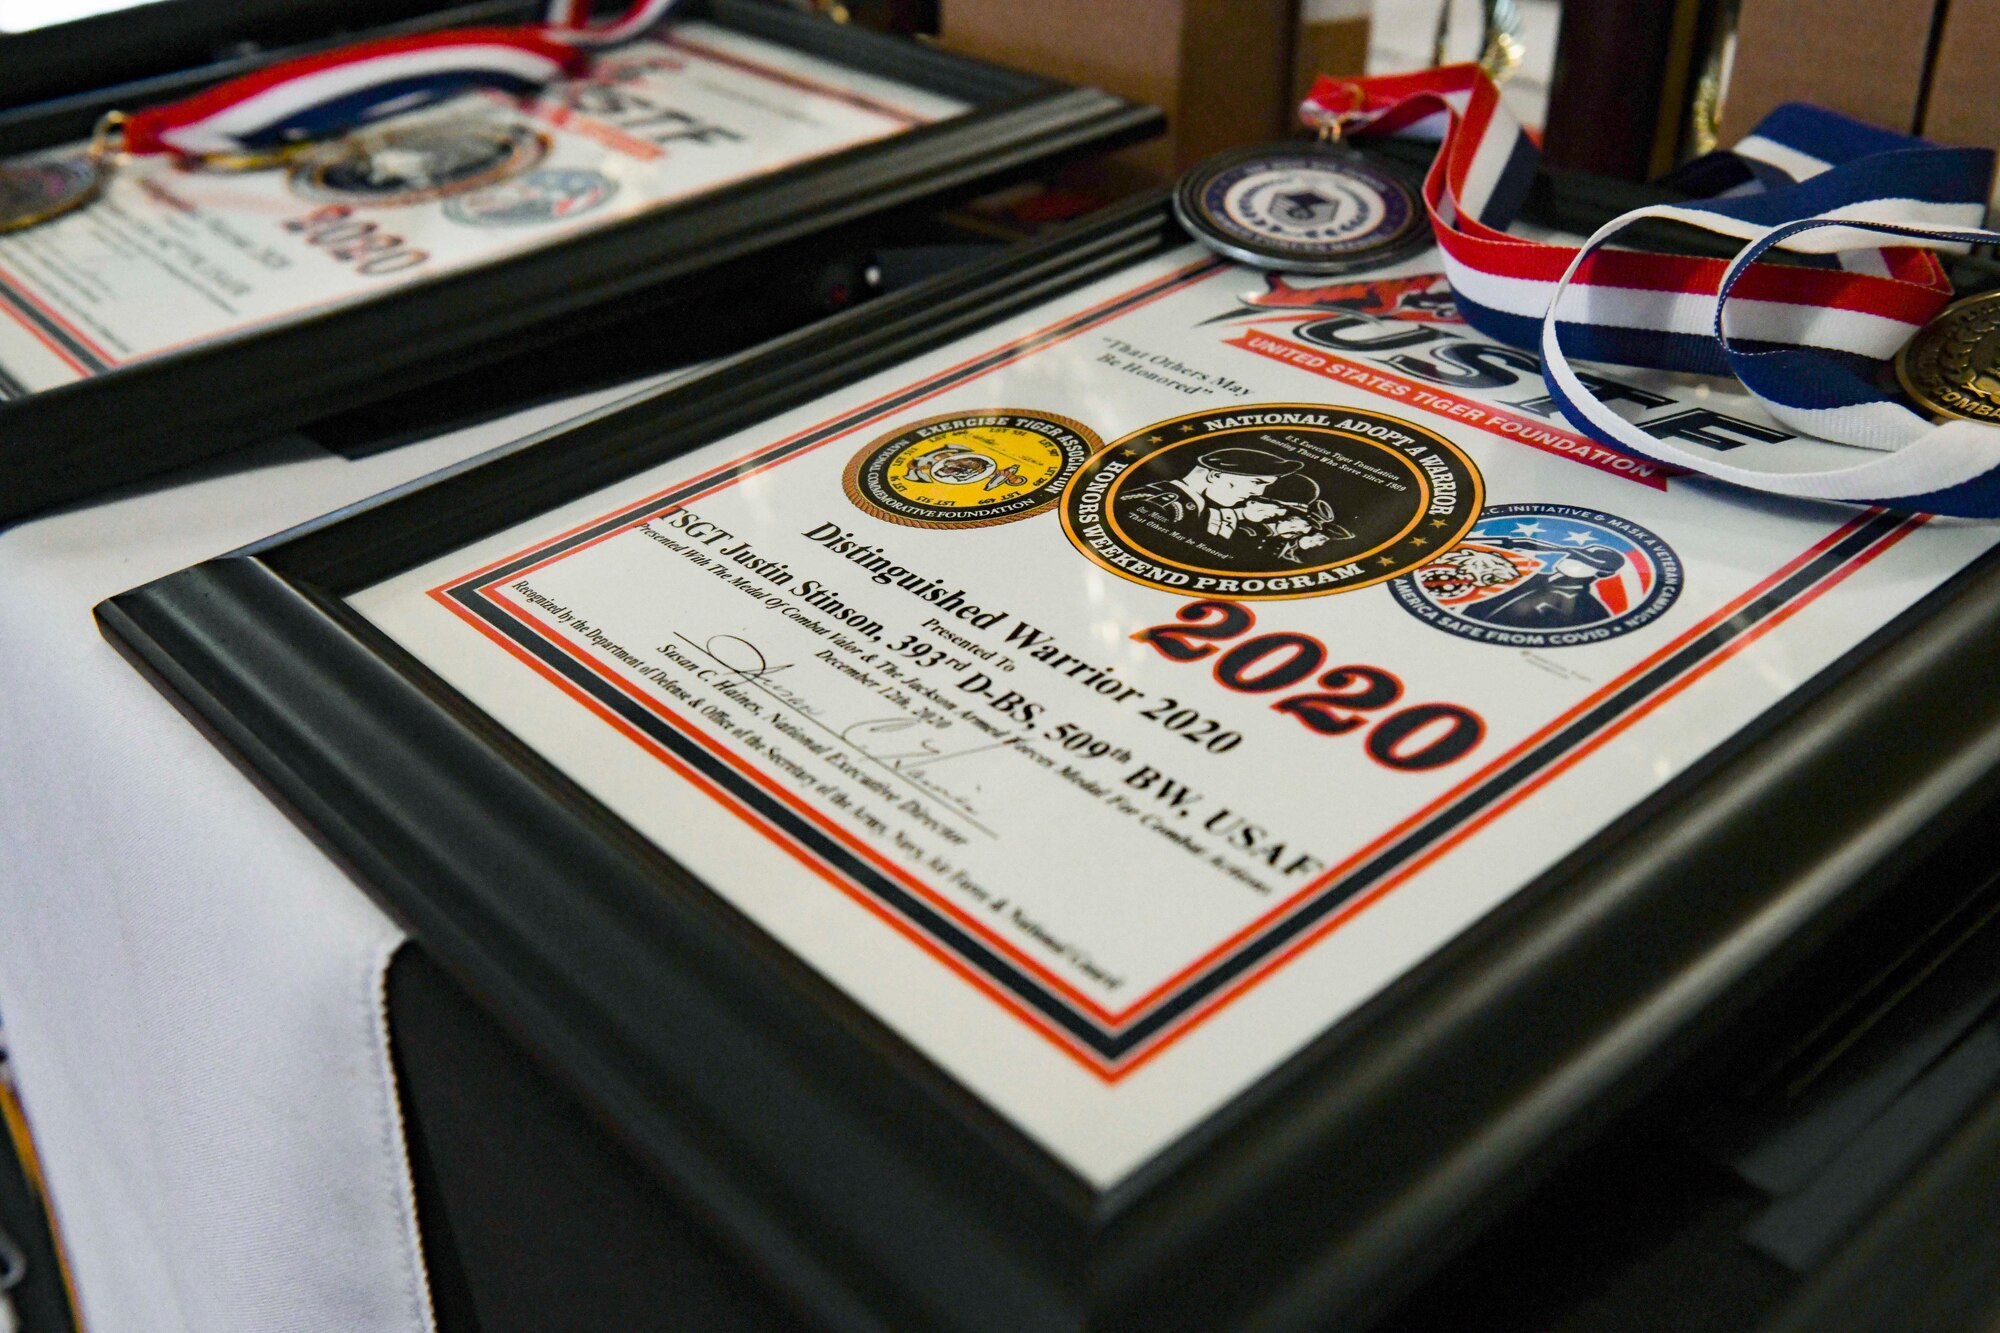 A United States Tiger Foundation award plaque and medals sit on a table prior to an official ceremony at Columbia, Missouri, Dec. 12, 2020. The Exercise Tiger Association hosted the program and honored service members and units for their outstanding achievements and meritorious service. Team Whiteman closely works with its local community to support each other through events and recognition ceremonies. (U.S. Air Force photo by Staff Sgt. Sadie Colbert)